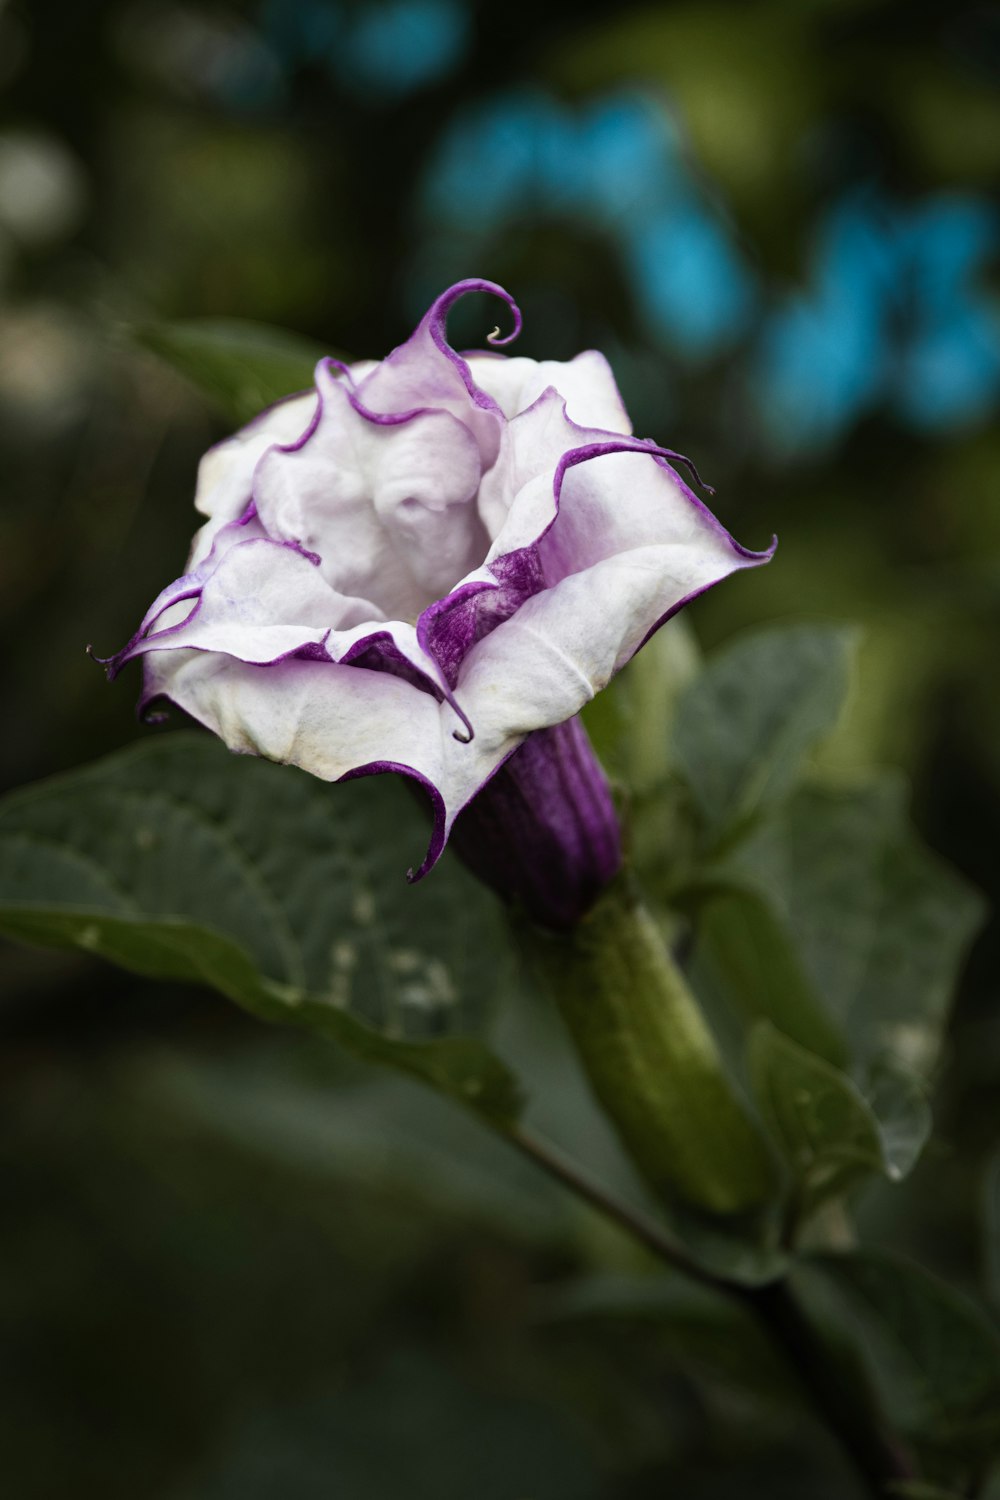 a white and purple flower with green leaves